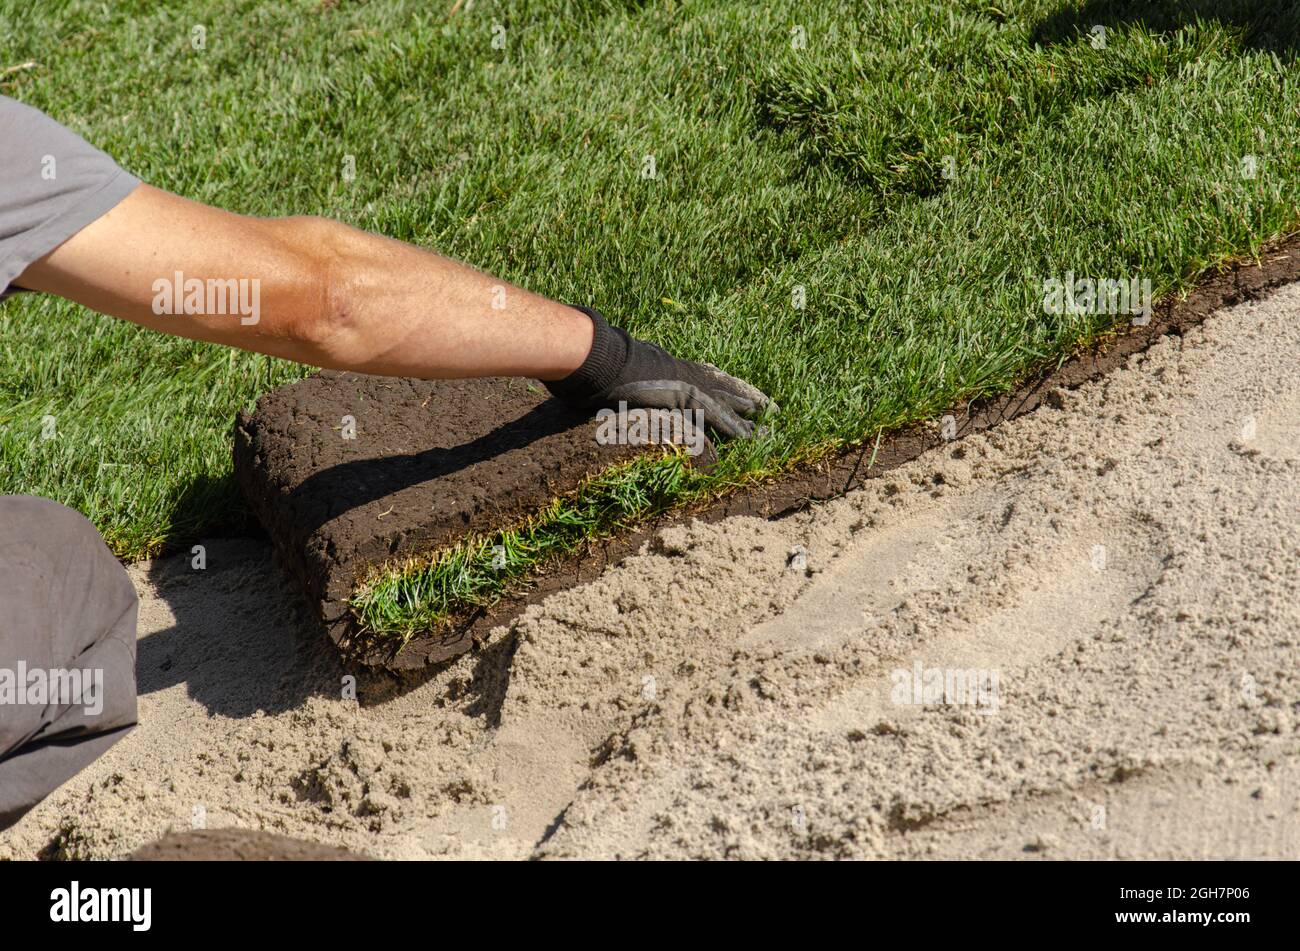 Gardener laying new roll lawn. Male hands in gardening gloves unrolling green grass rolls Stock Photo